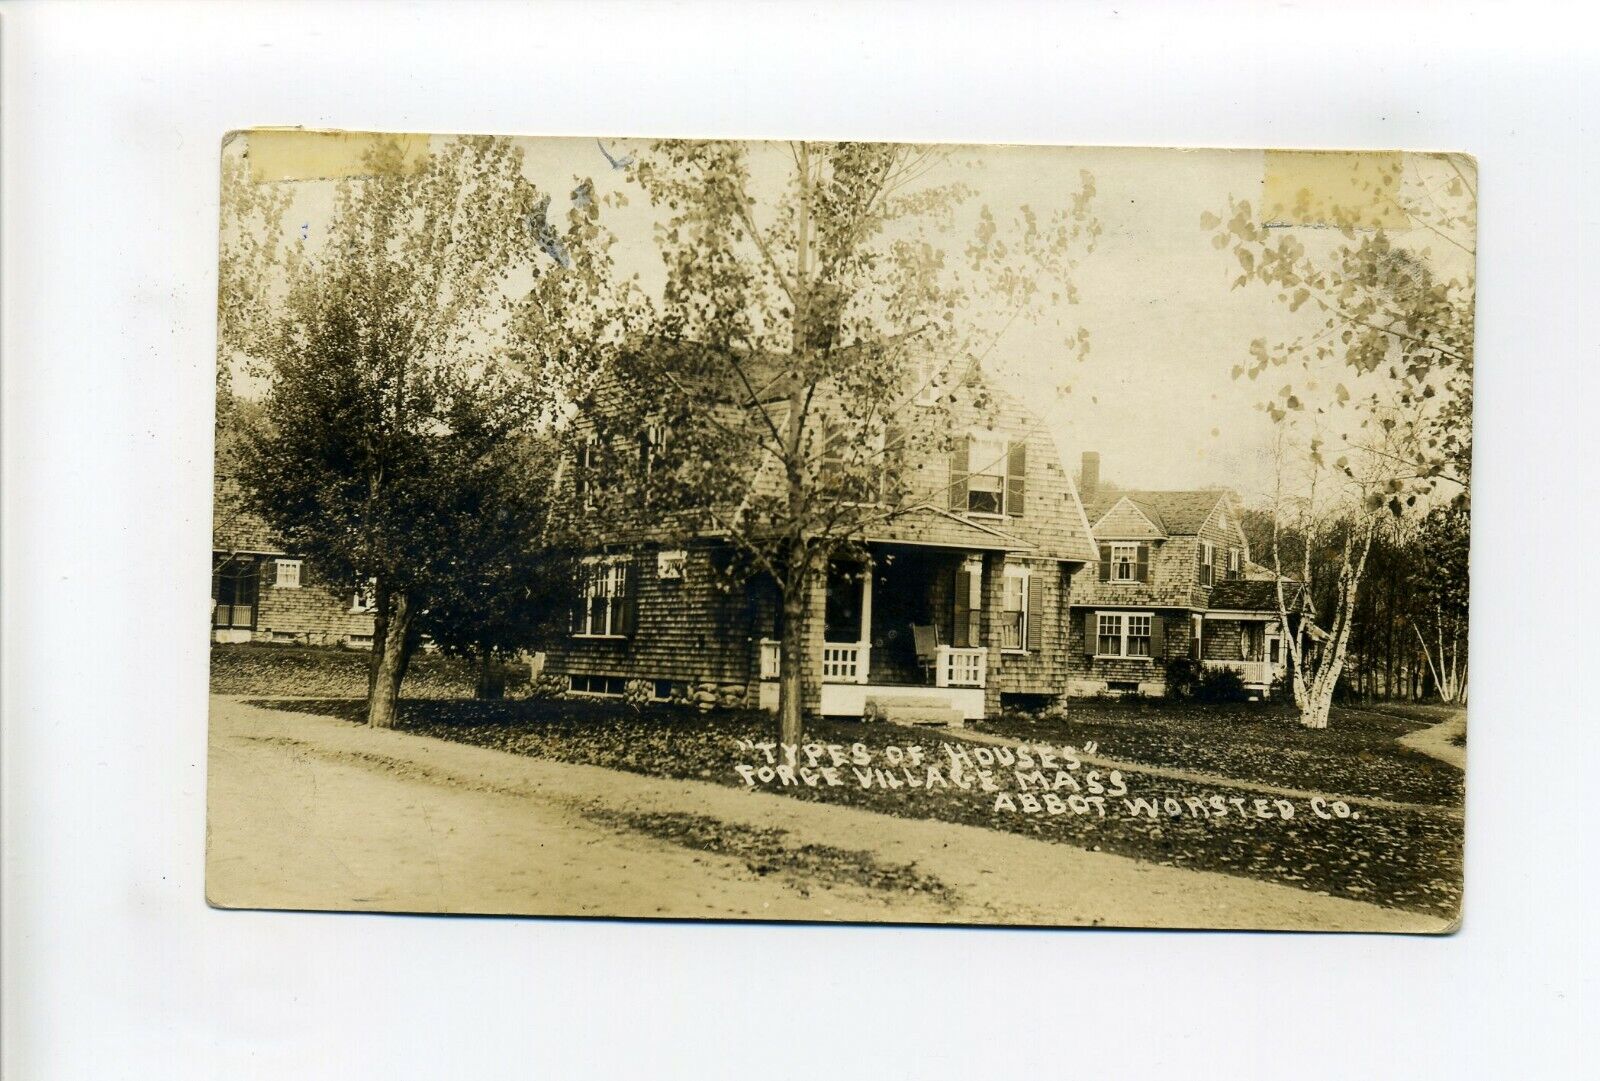 Westford MA Mass RPPC real photo postcard, Forge Village housing, Abbot Worsted